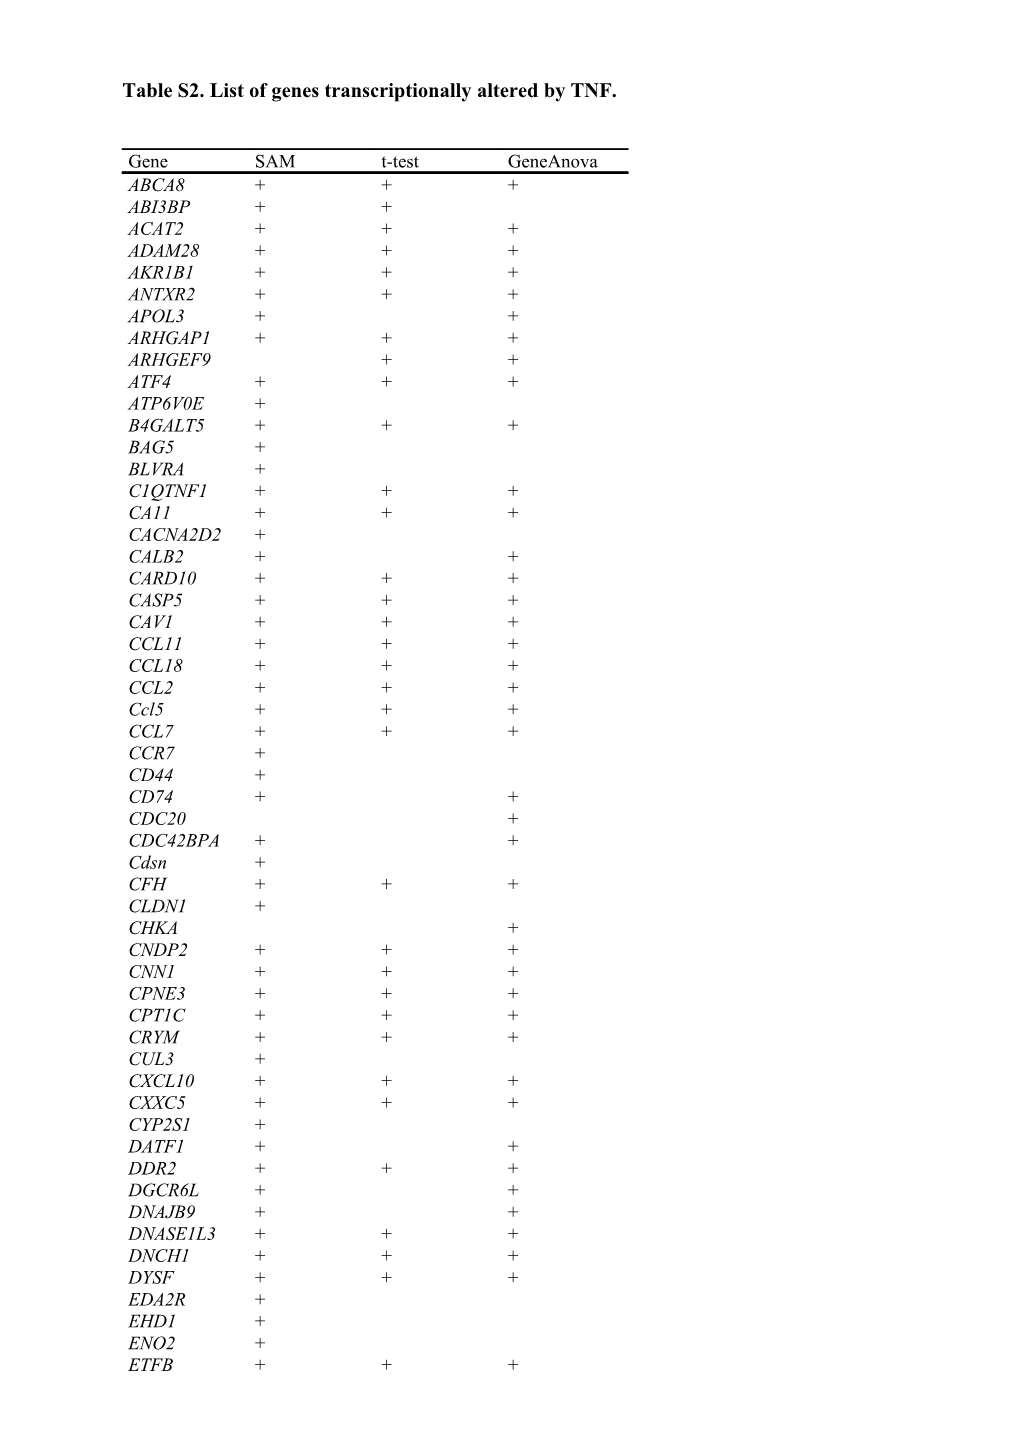 Table S2. List of Genes Transcriptionally Altered by TNF